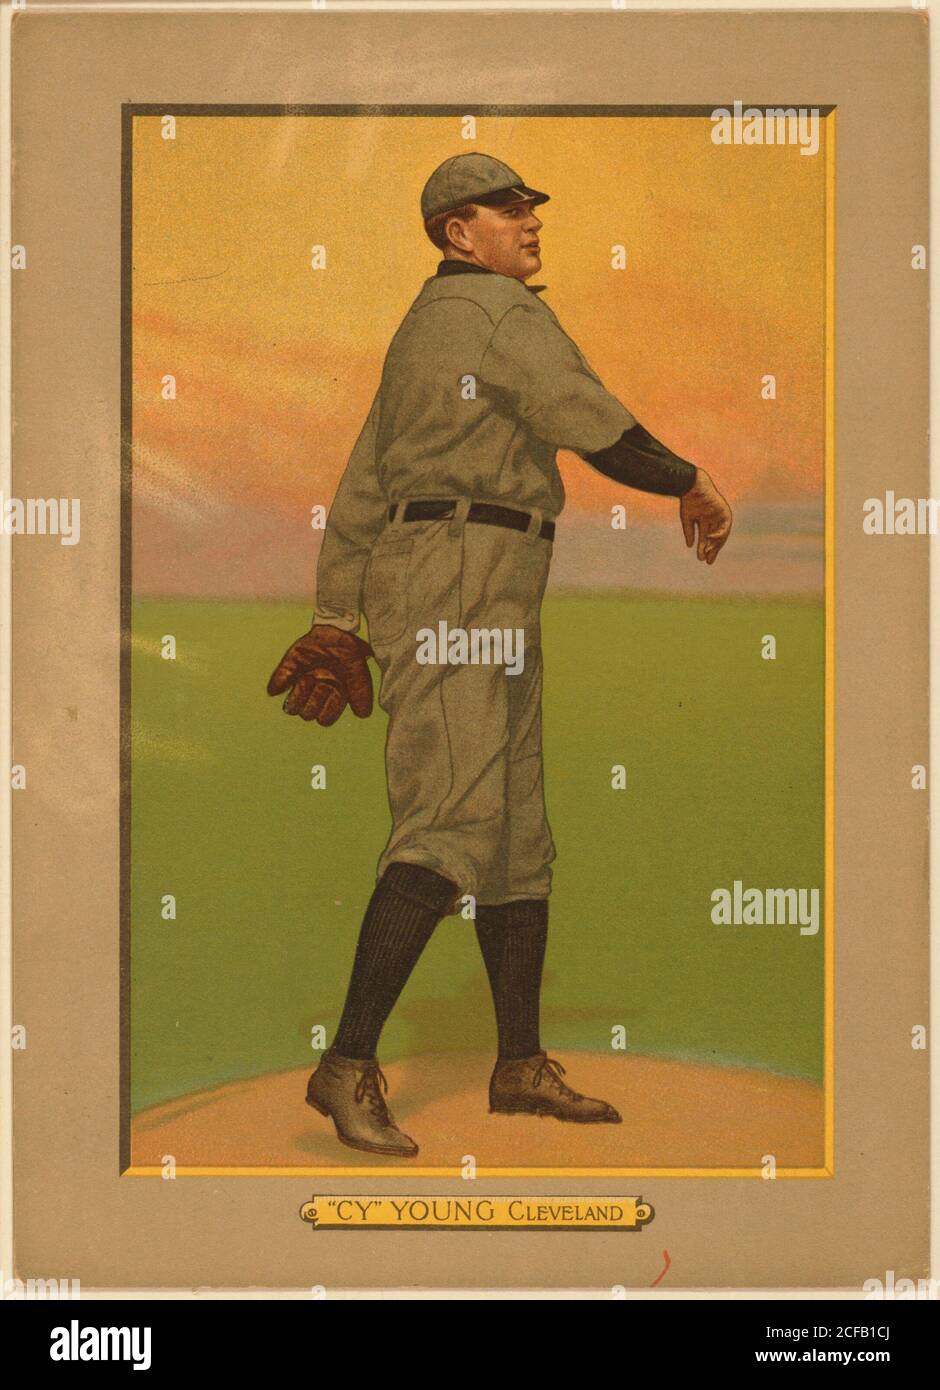 Cy Young, Cleveland Naps Stock Photo